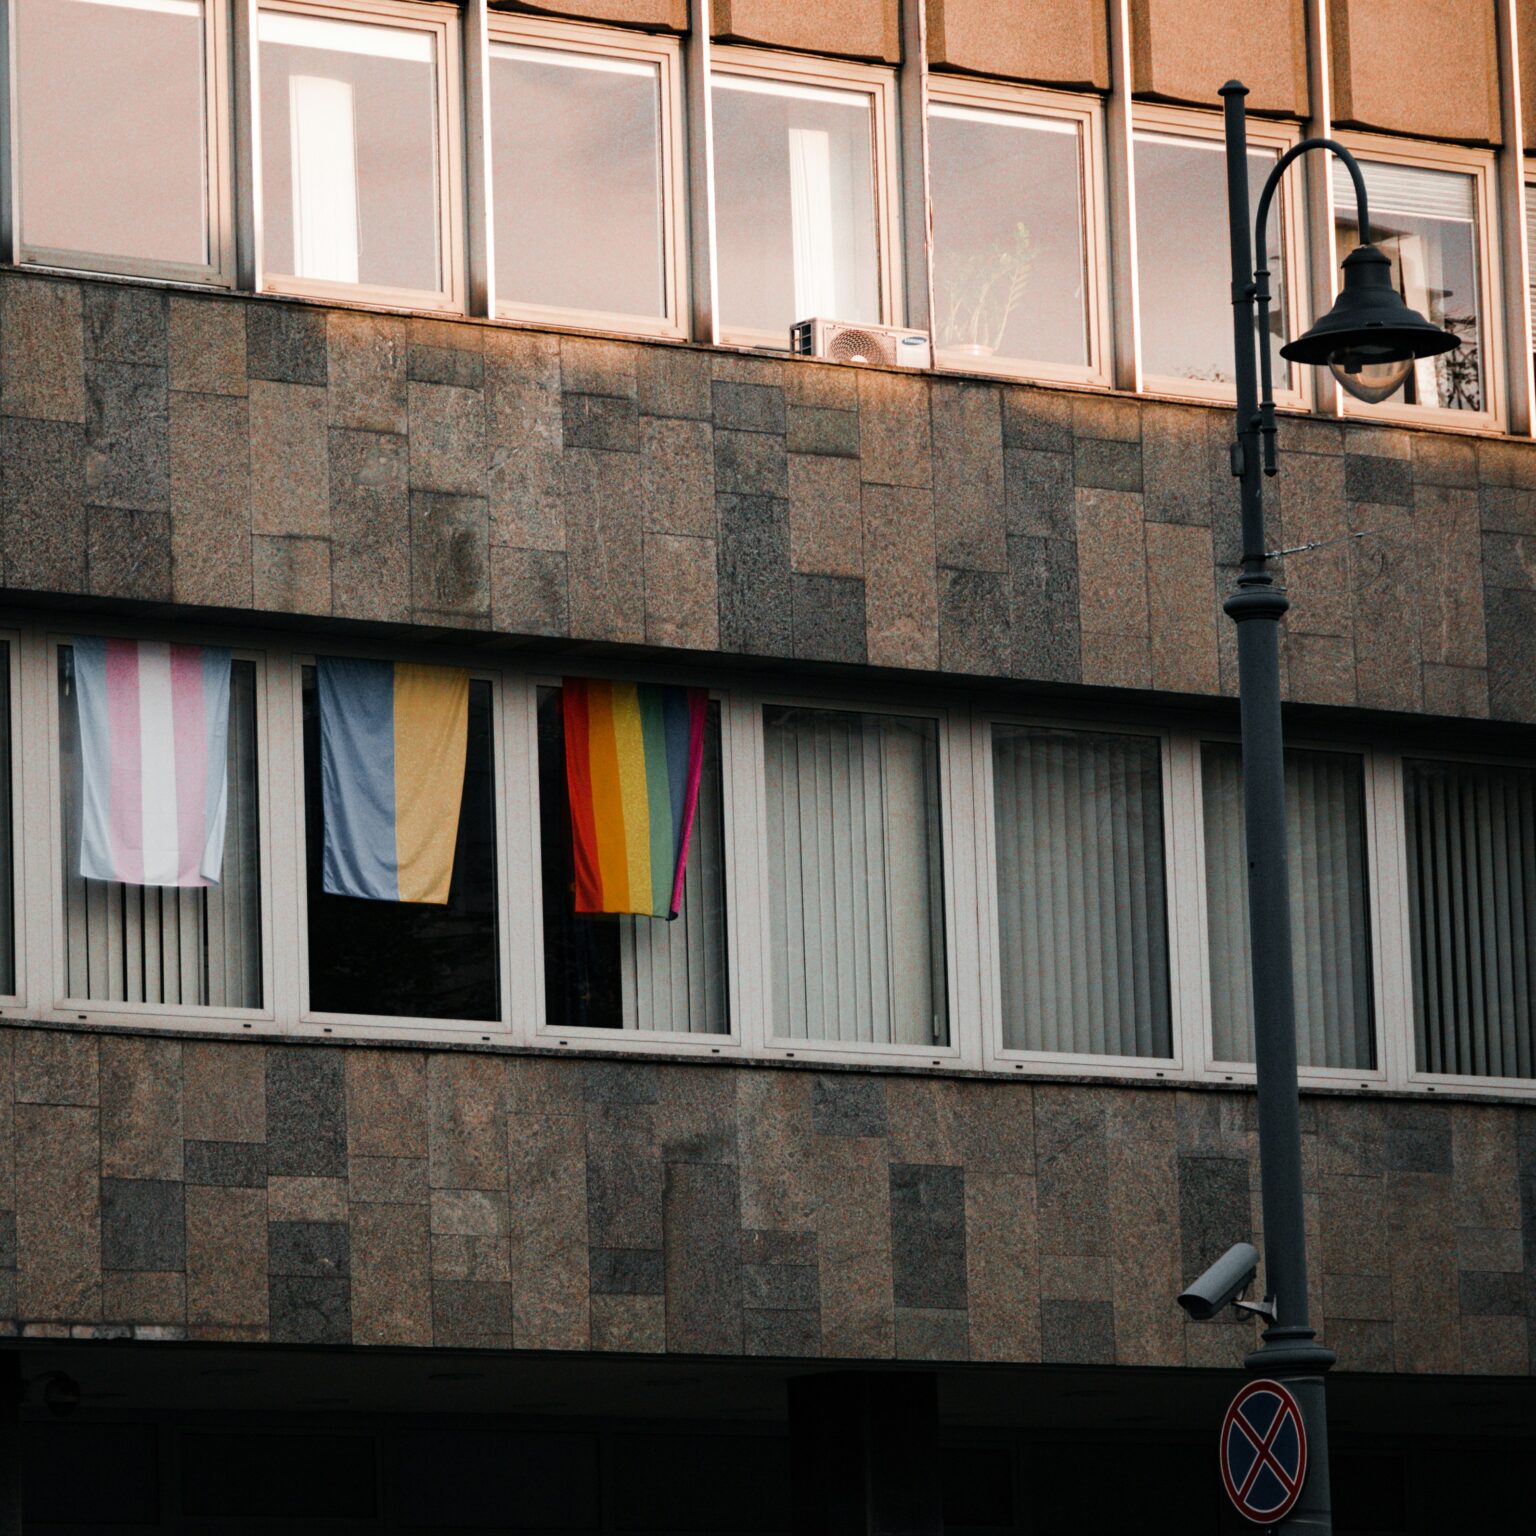 A transgender, Ukraine, and rainbow flag hanging from windows of a building.